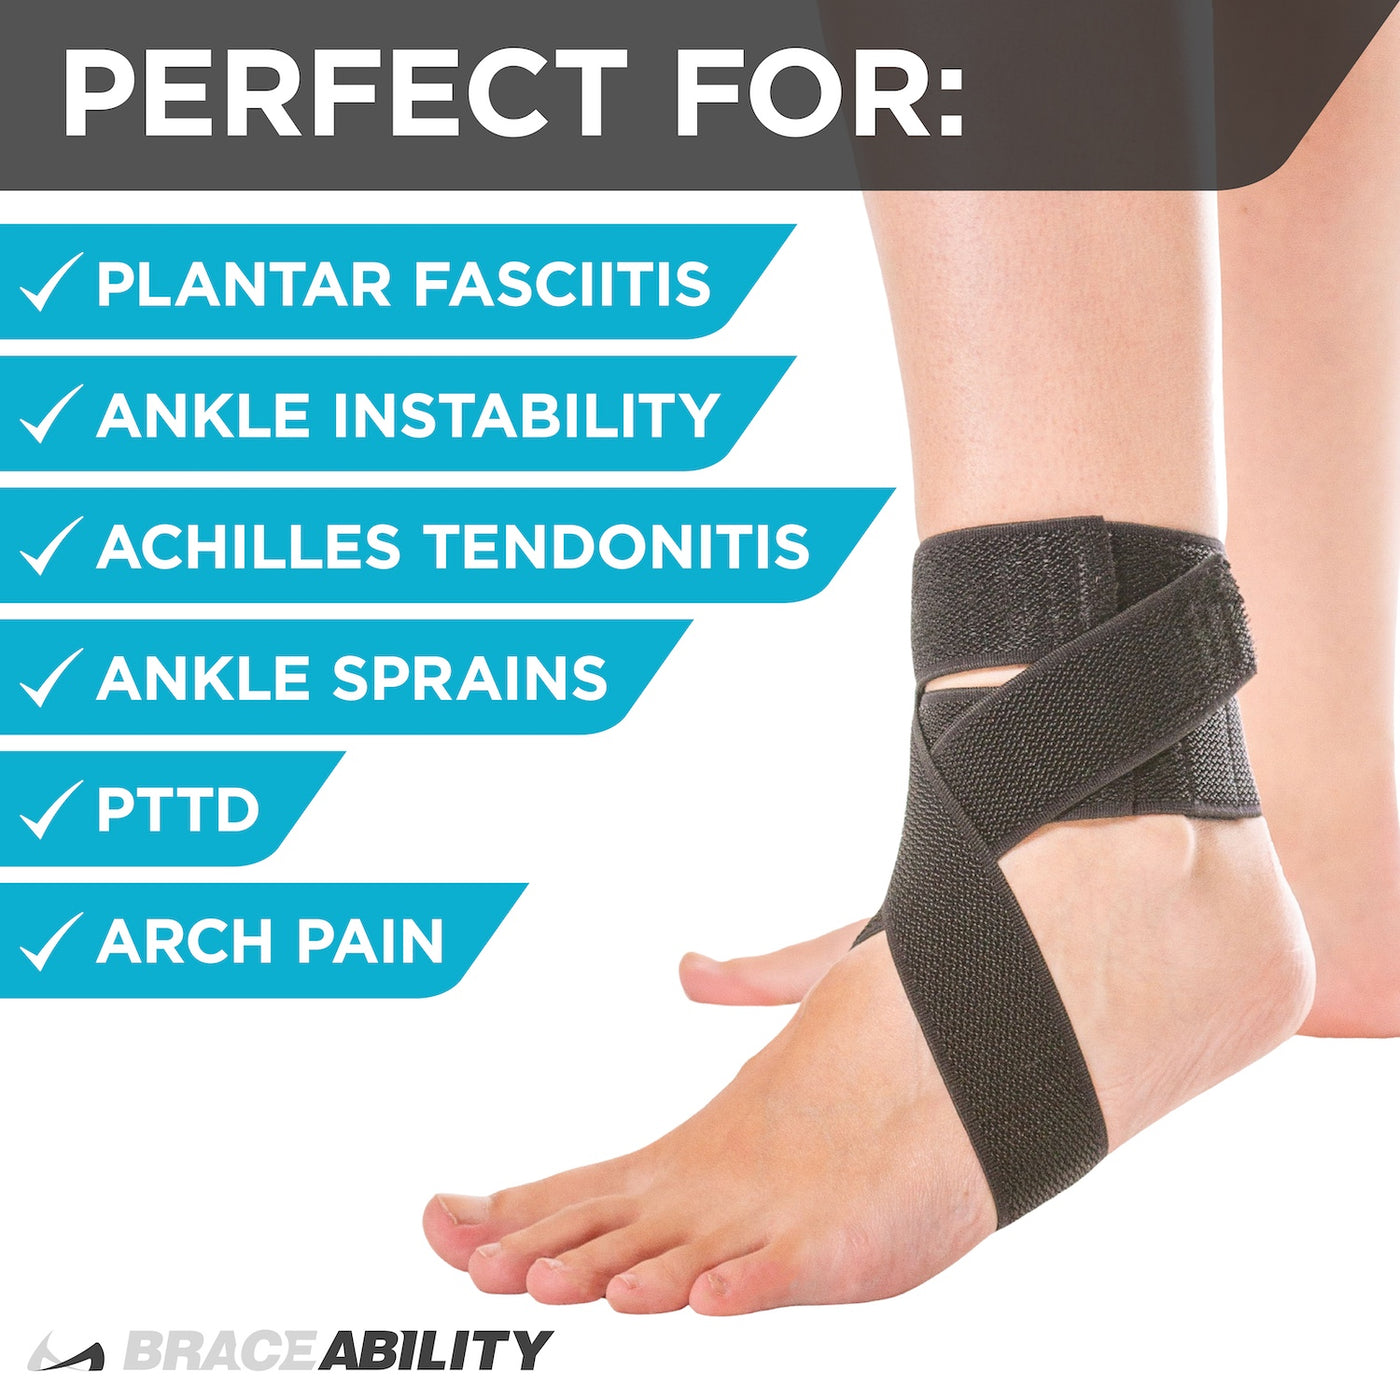 Plantar fasciitis ankle brace for running helps prevent ankle sprains, and achilles tendonitis